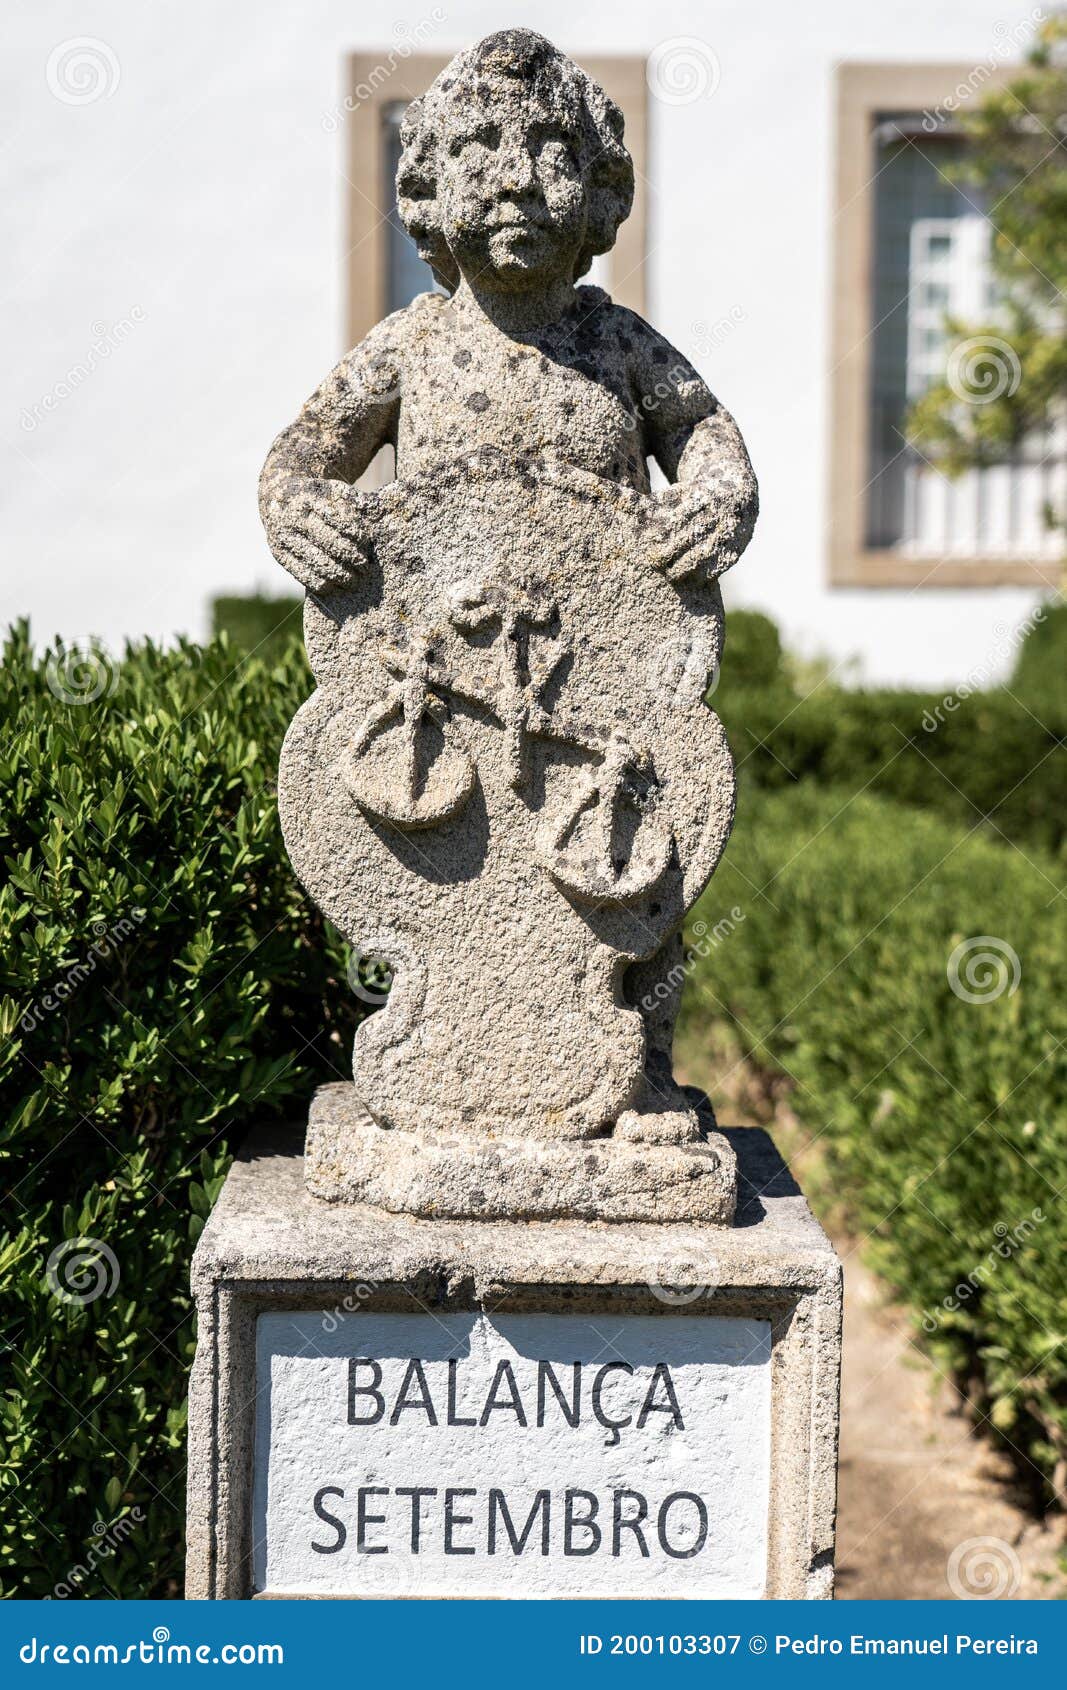 stone statue depicting the scale sign belonging to the episcopal garden of the city of castelo branco